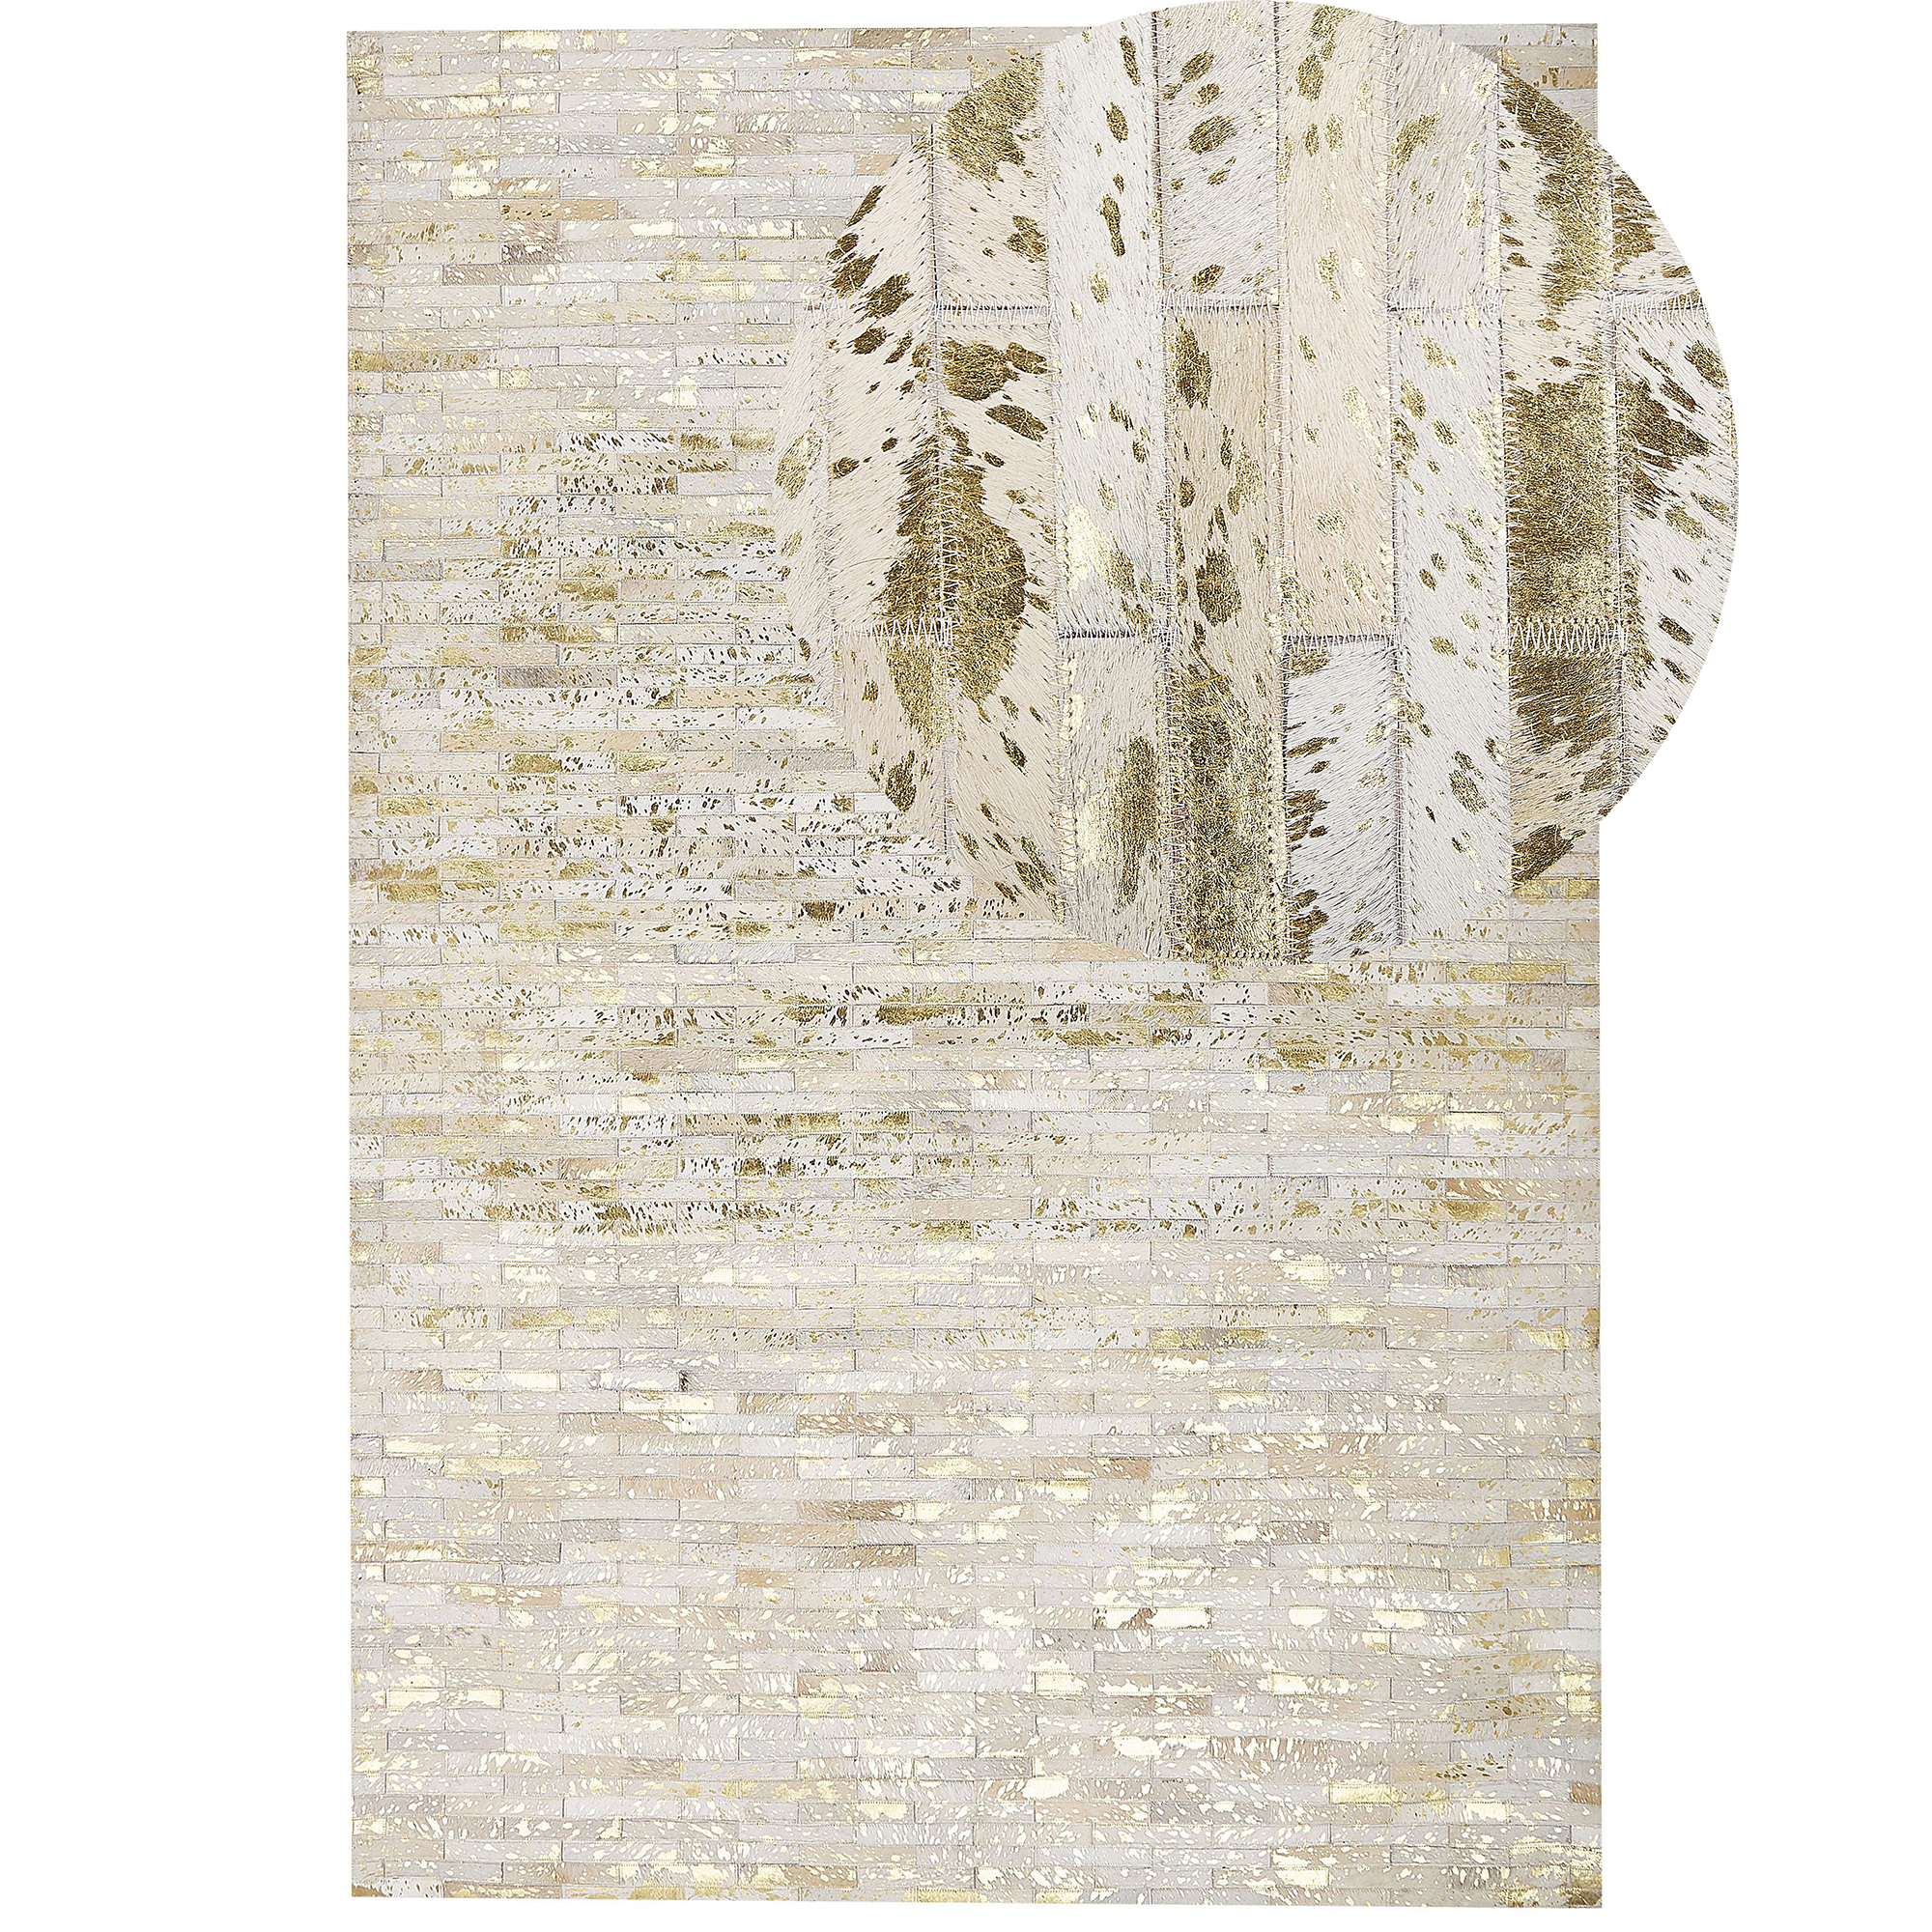 Beliani Rectangular Area Rug Beige and Gold Cowhide Leather 160 x 230 cm Patchwork Geometric Pattern Retro